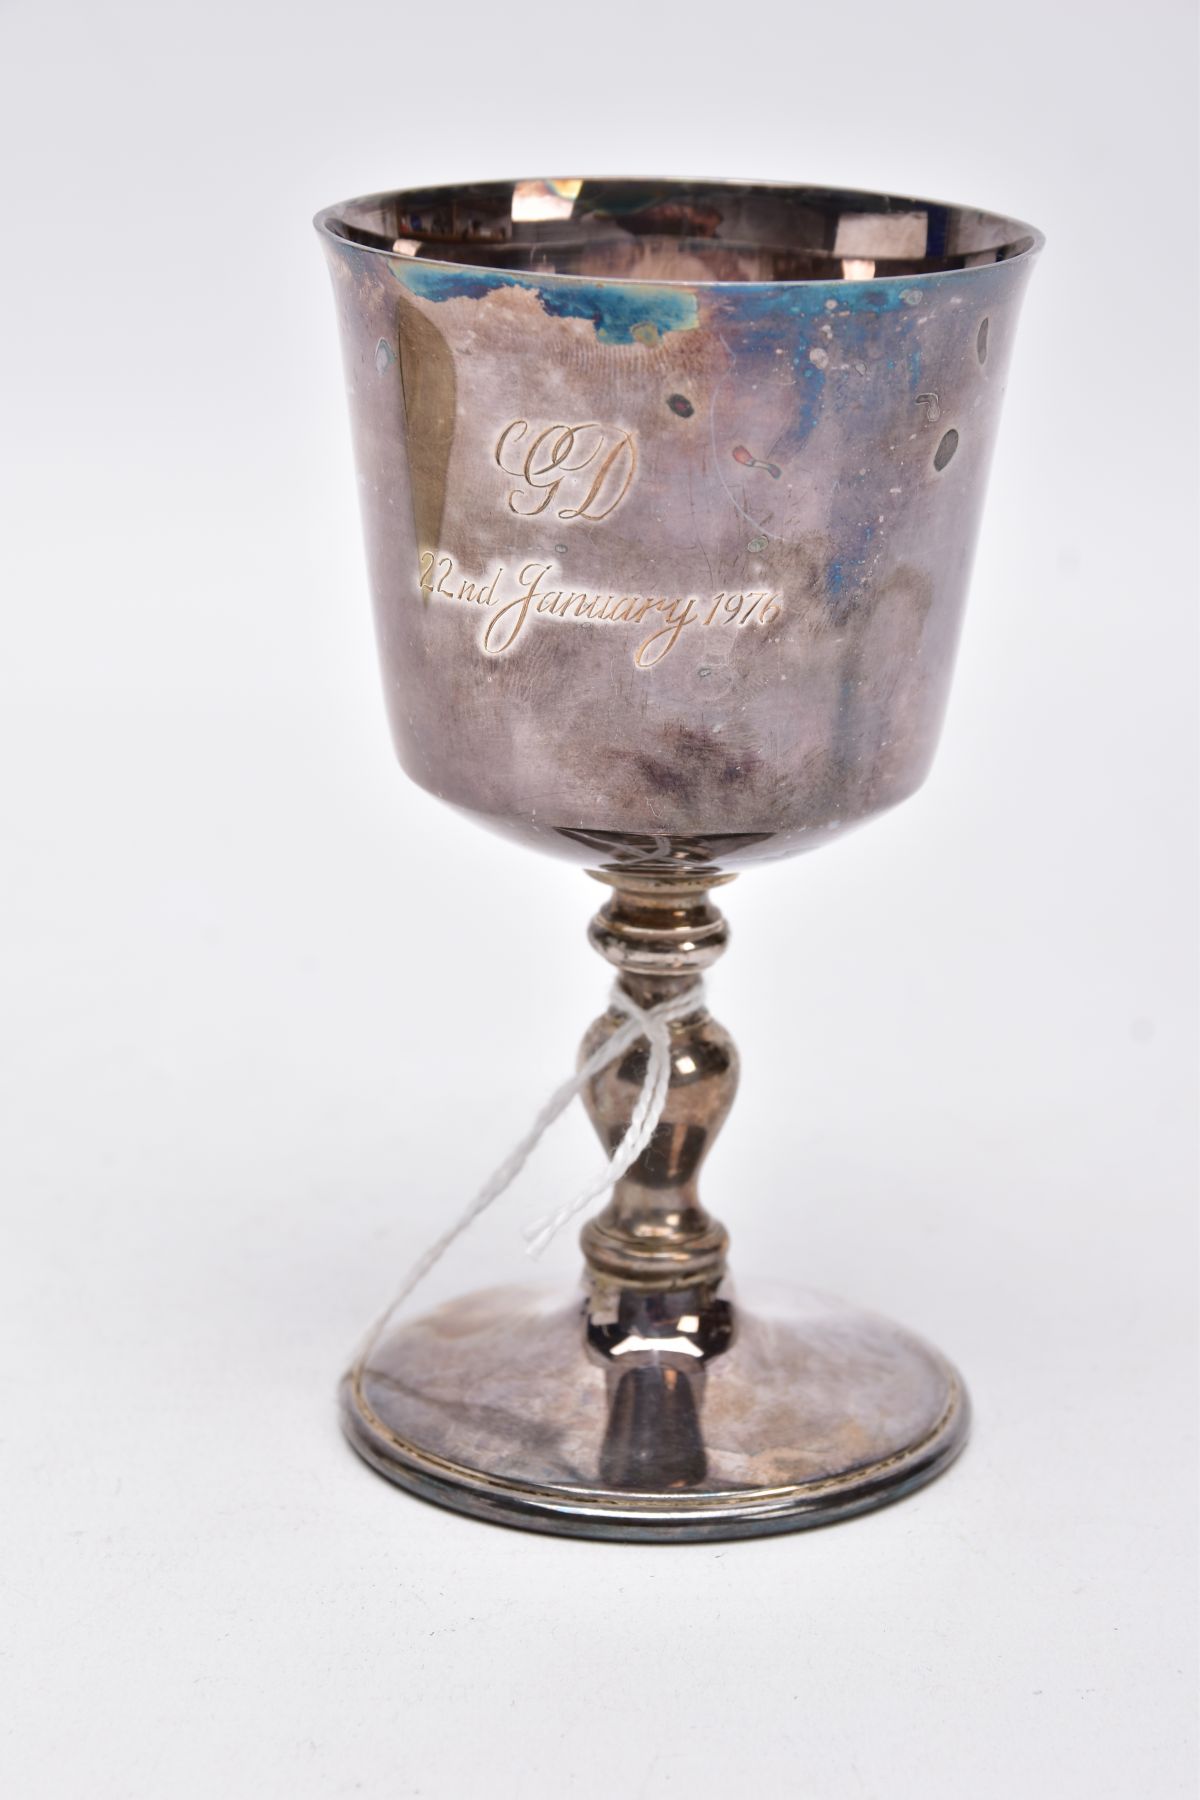 A SILVER GOBLET, of a plain polished design, on a circular base, engraved 'GD 22nd January 1976', - Image 3 of 5